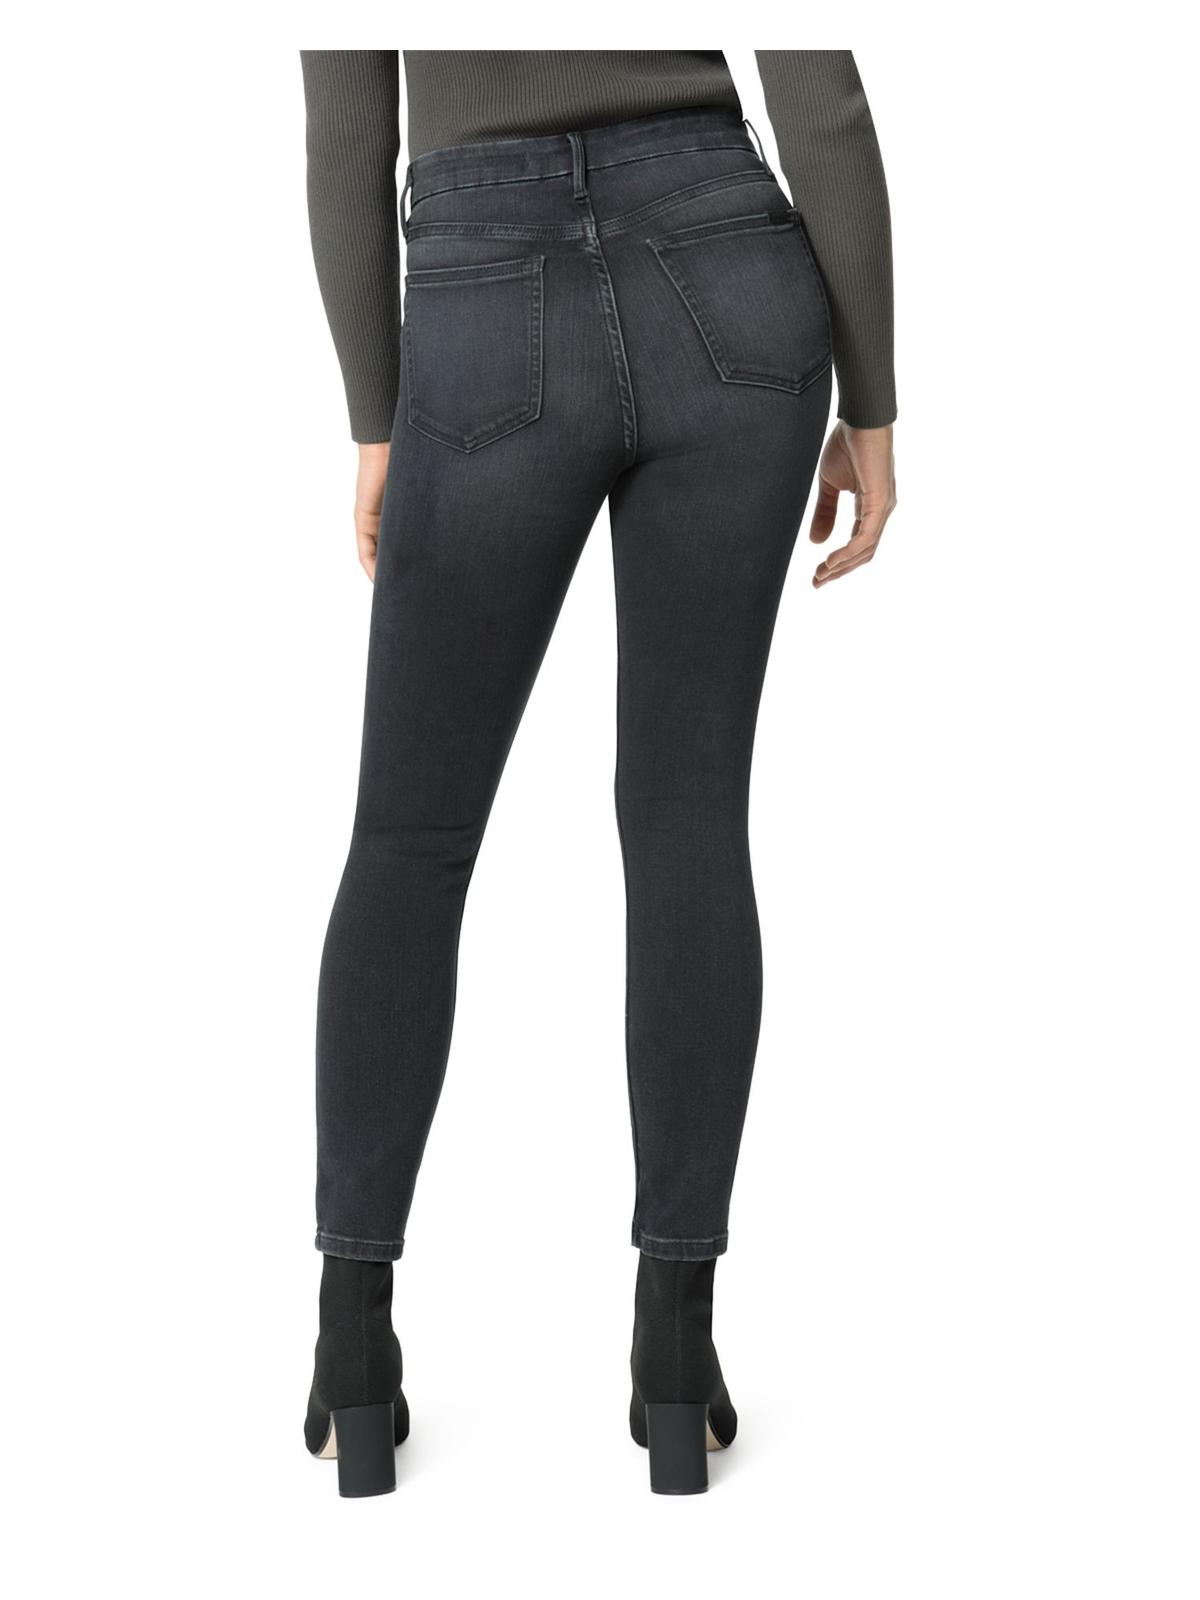 The Charlie Ankle Skinny Jeans In Hayward - image 2 of 2